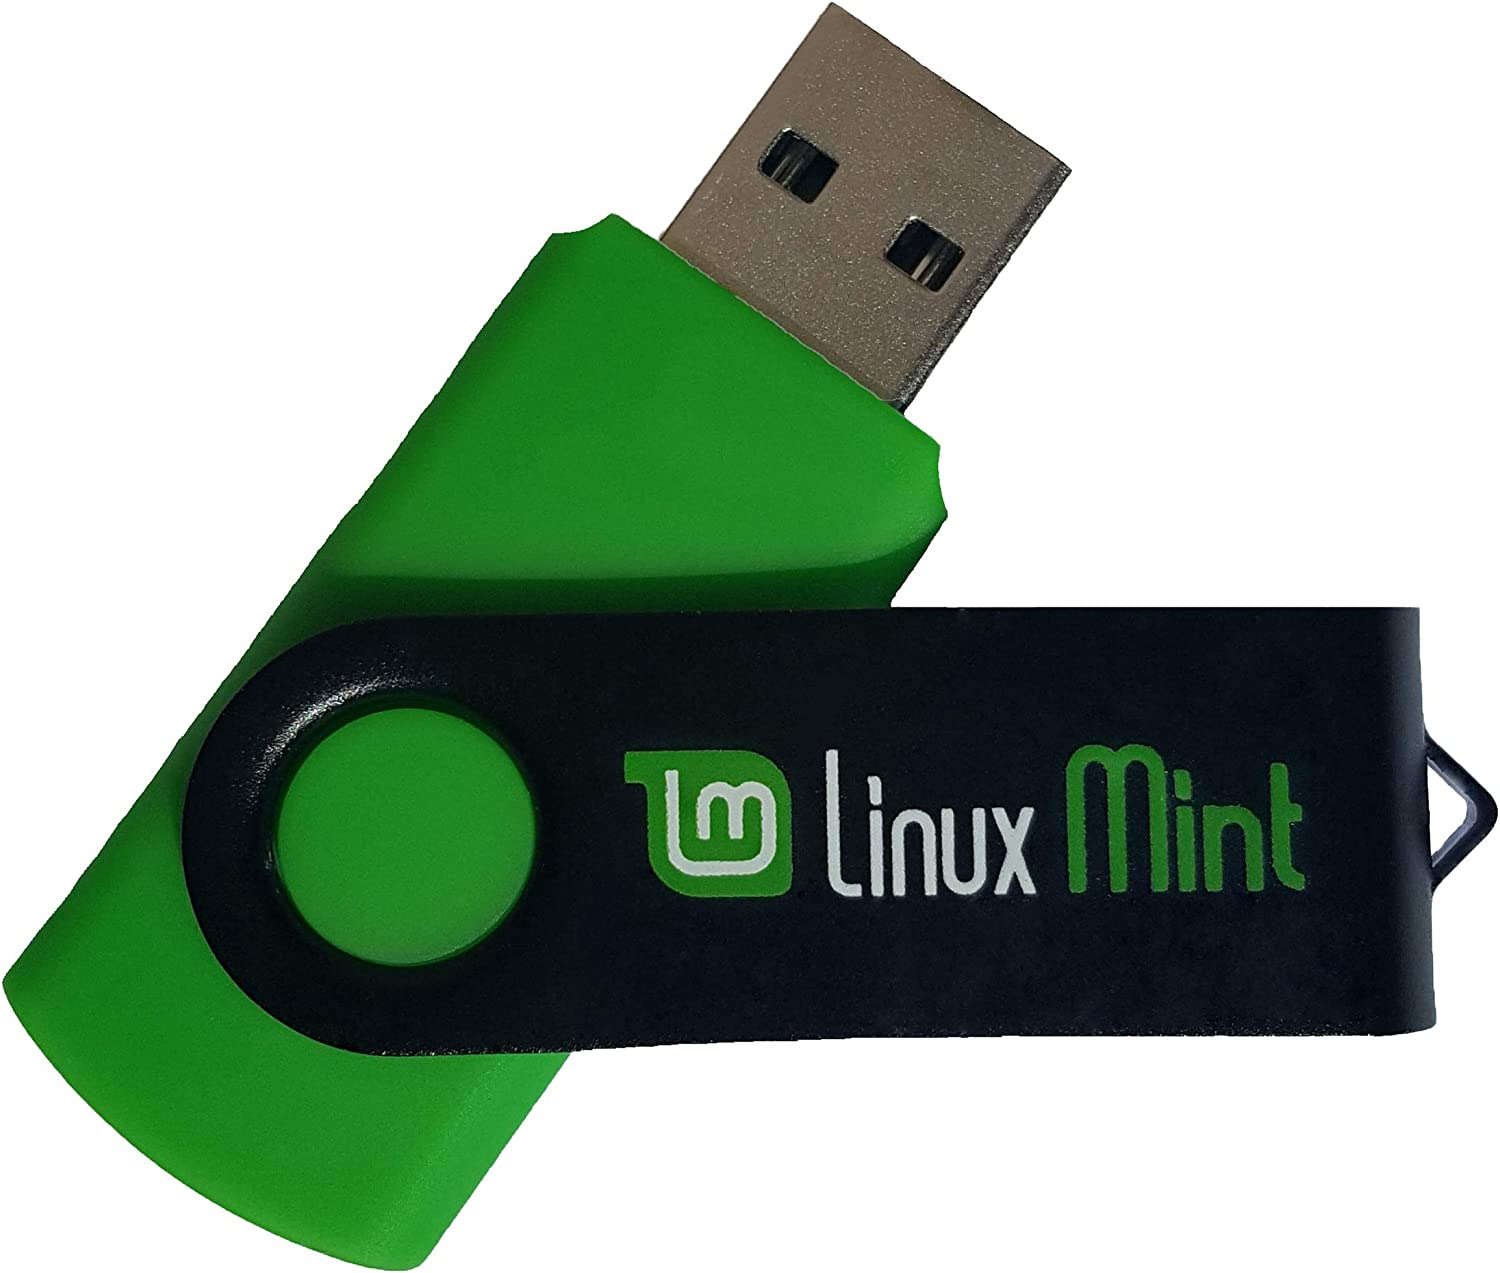 Learn How to Use, Mint Cinnamon 21 Bootable 8GB USB Flash Drive - Includes Boot 